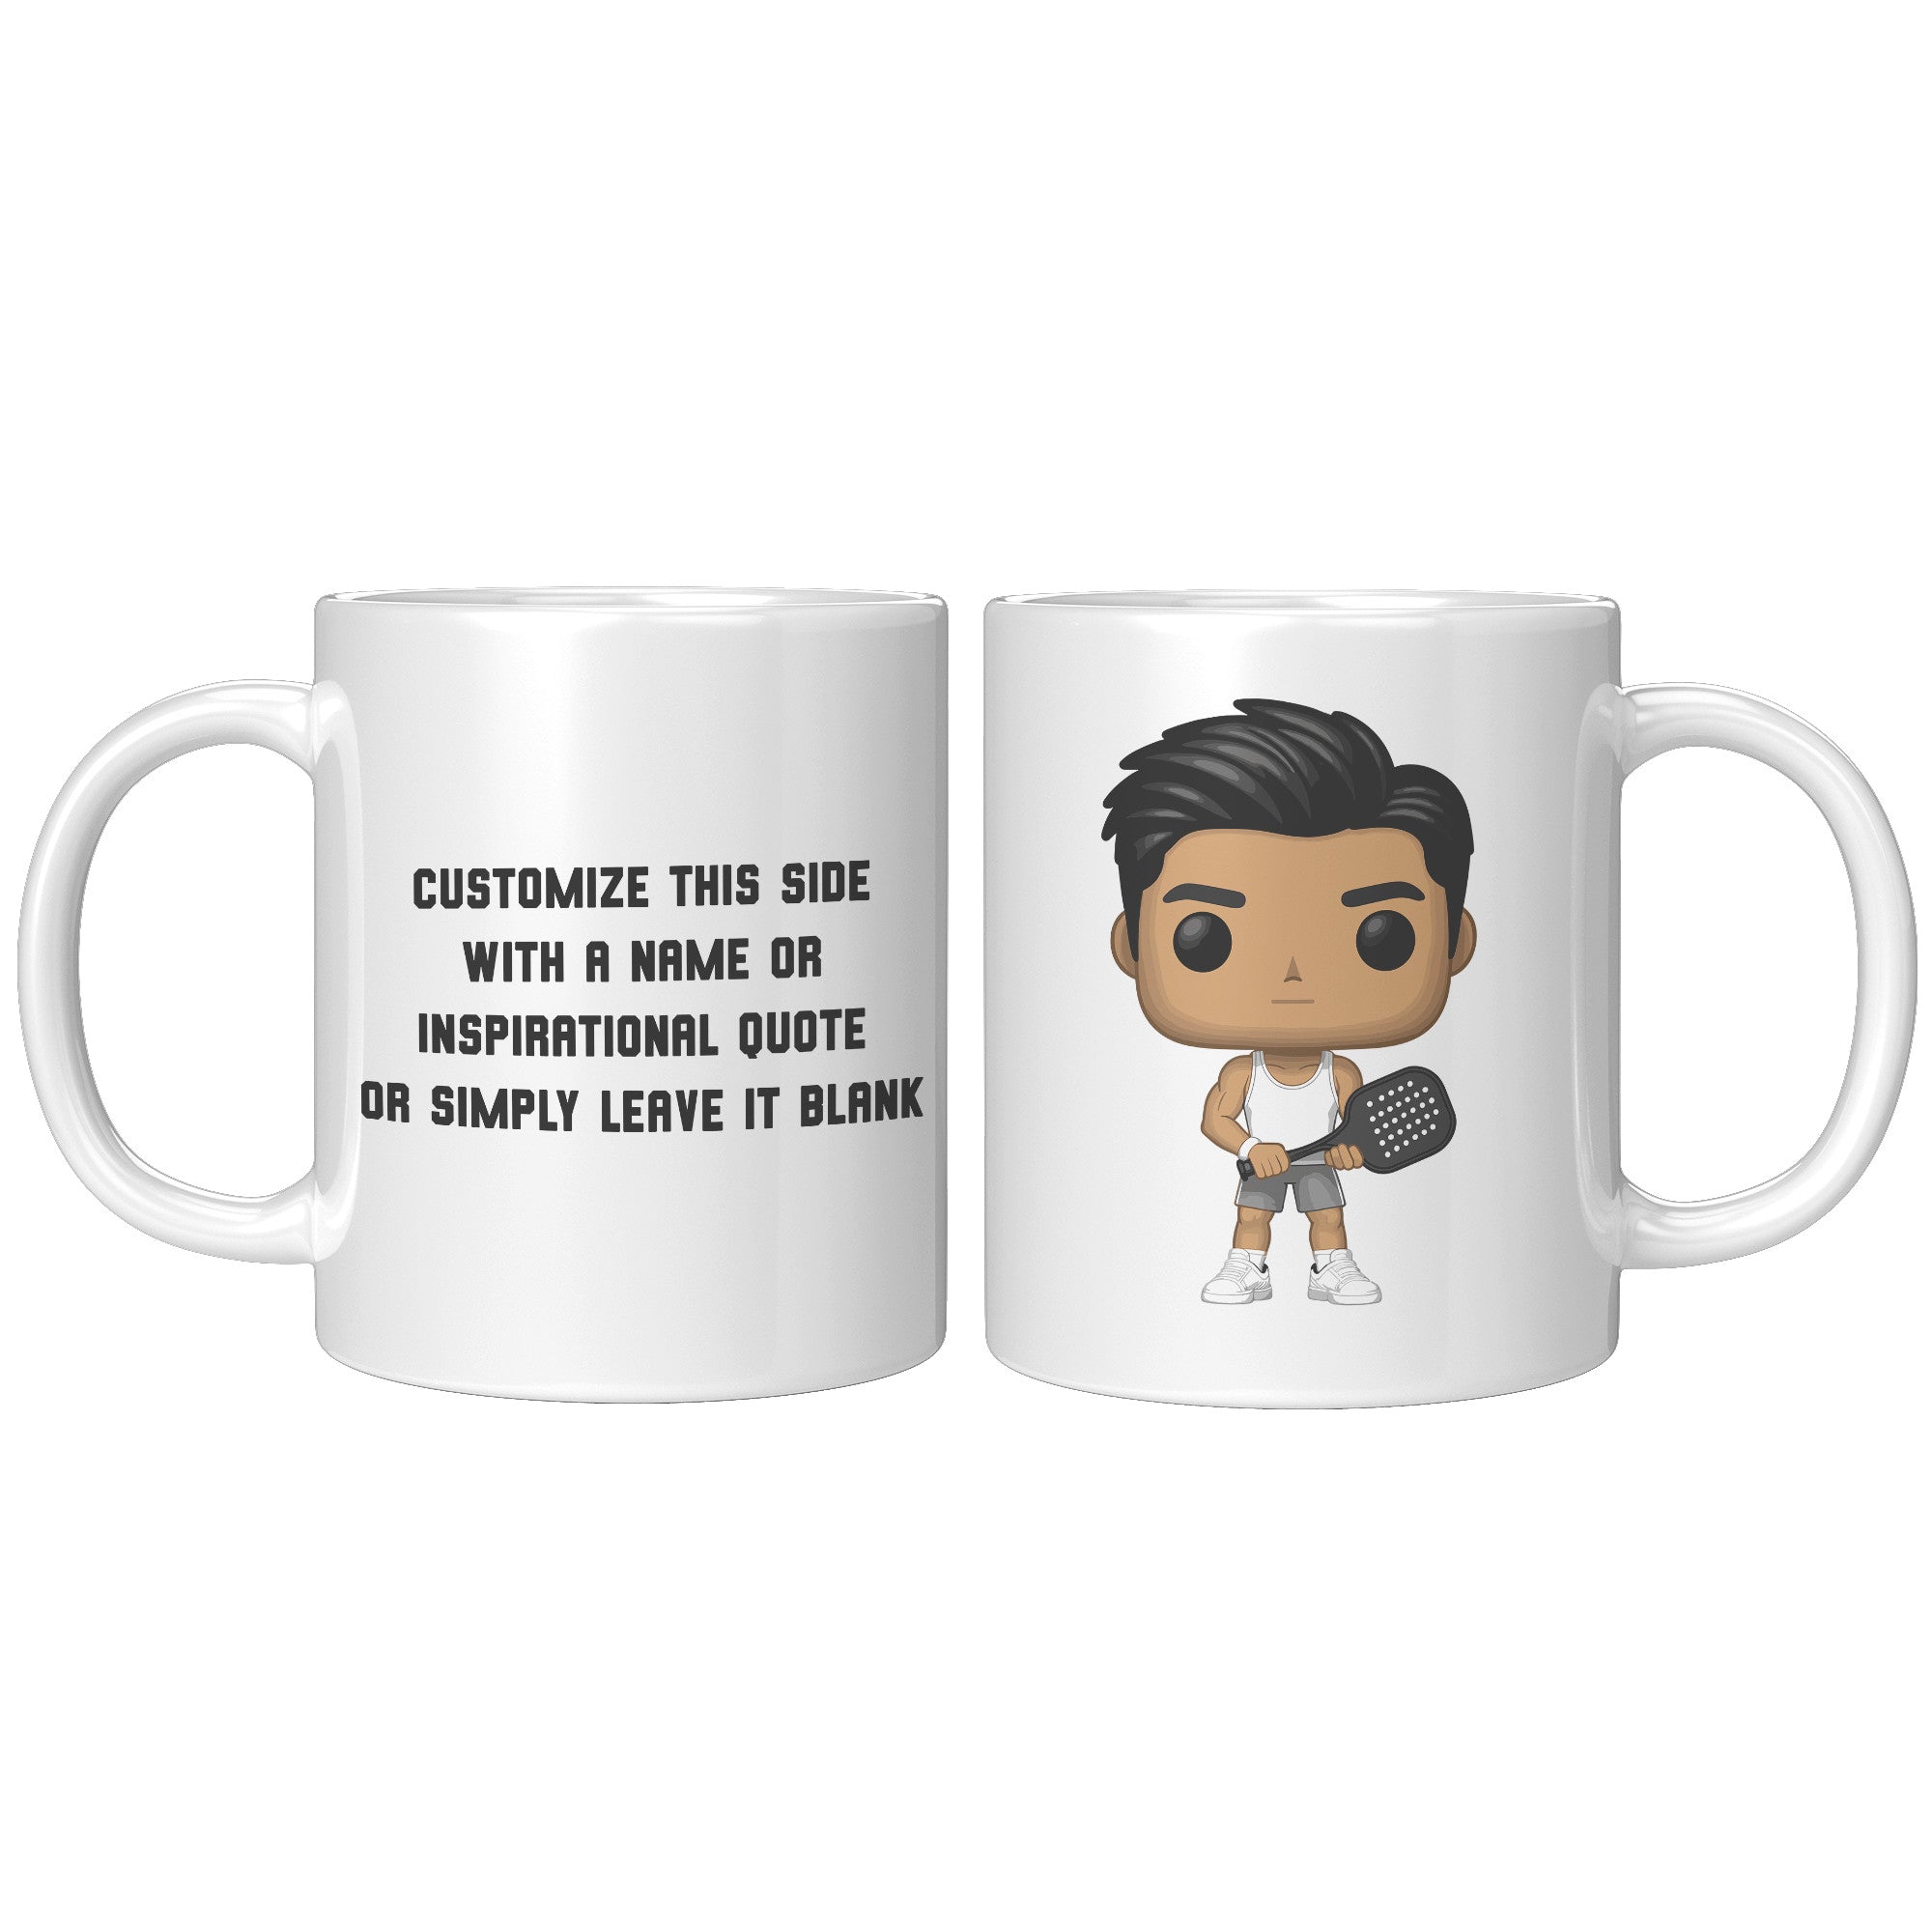 "Funko Pop Style Pickle Ball Player Boy Coffee Mug - Cute Athletic Cup - Perfect Gift for Pickle Ball Enthusiasts - Sporty Boy Apparel" - A